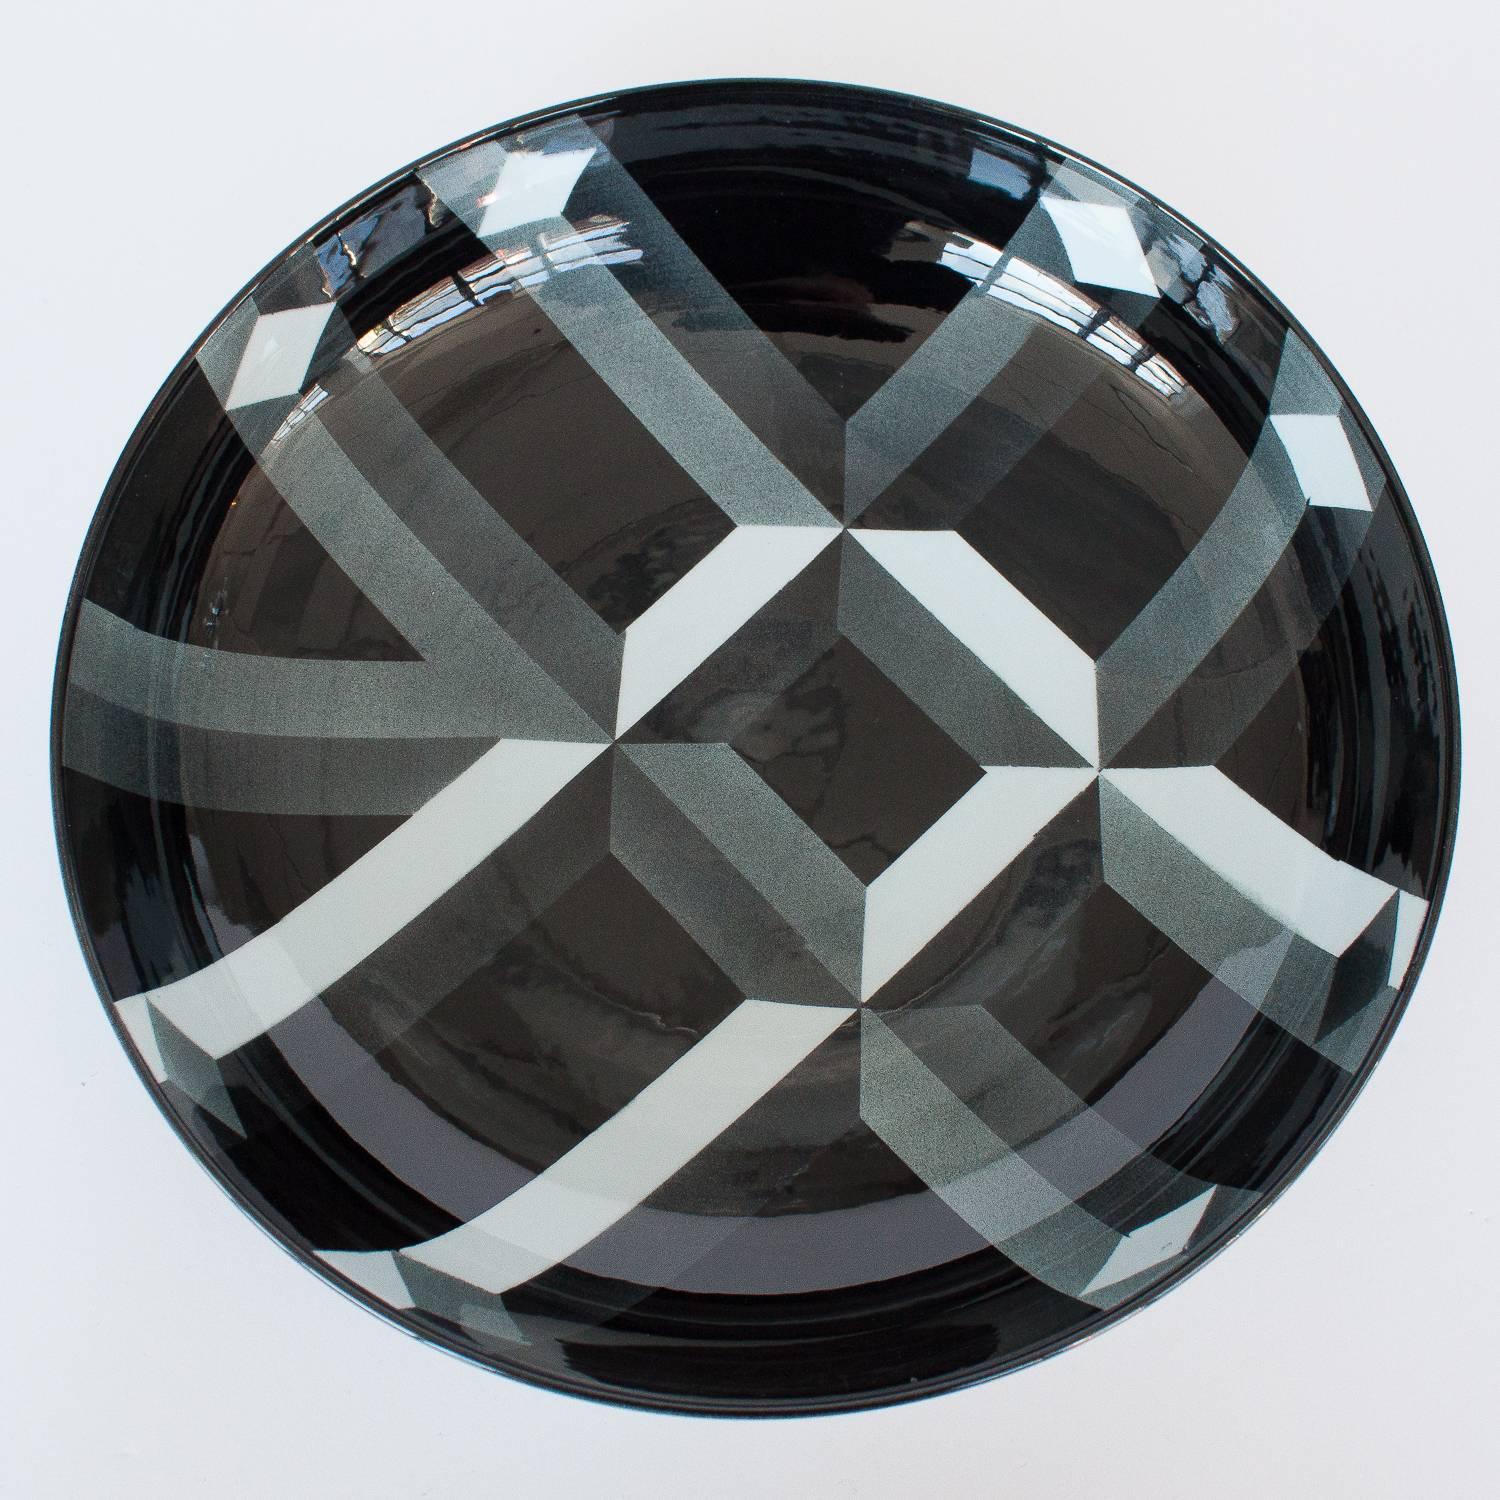 A large beautiful modern porcelain bowl by Rolf Sinnemark for Rörstrand, Sweden. Atlantis series. The black glazed bowl is decorated on the exterior and interior with printed geometric forms in shades of gray. Signed to bottom.
 